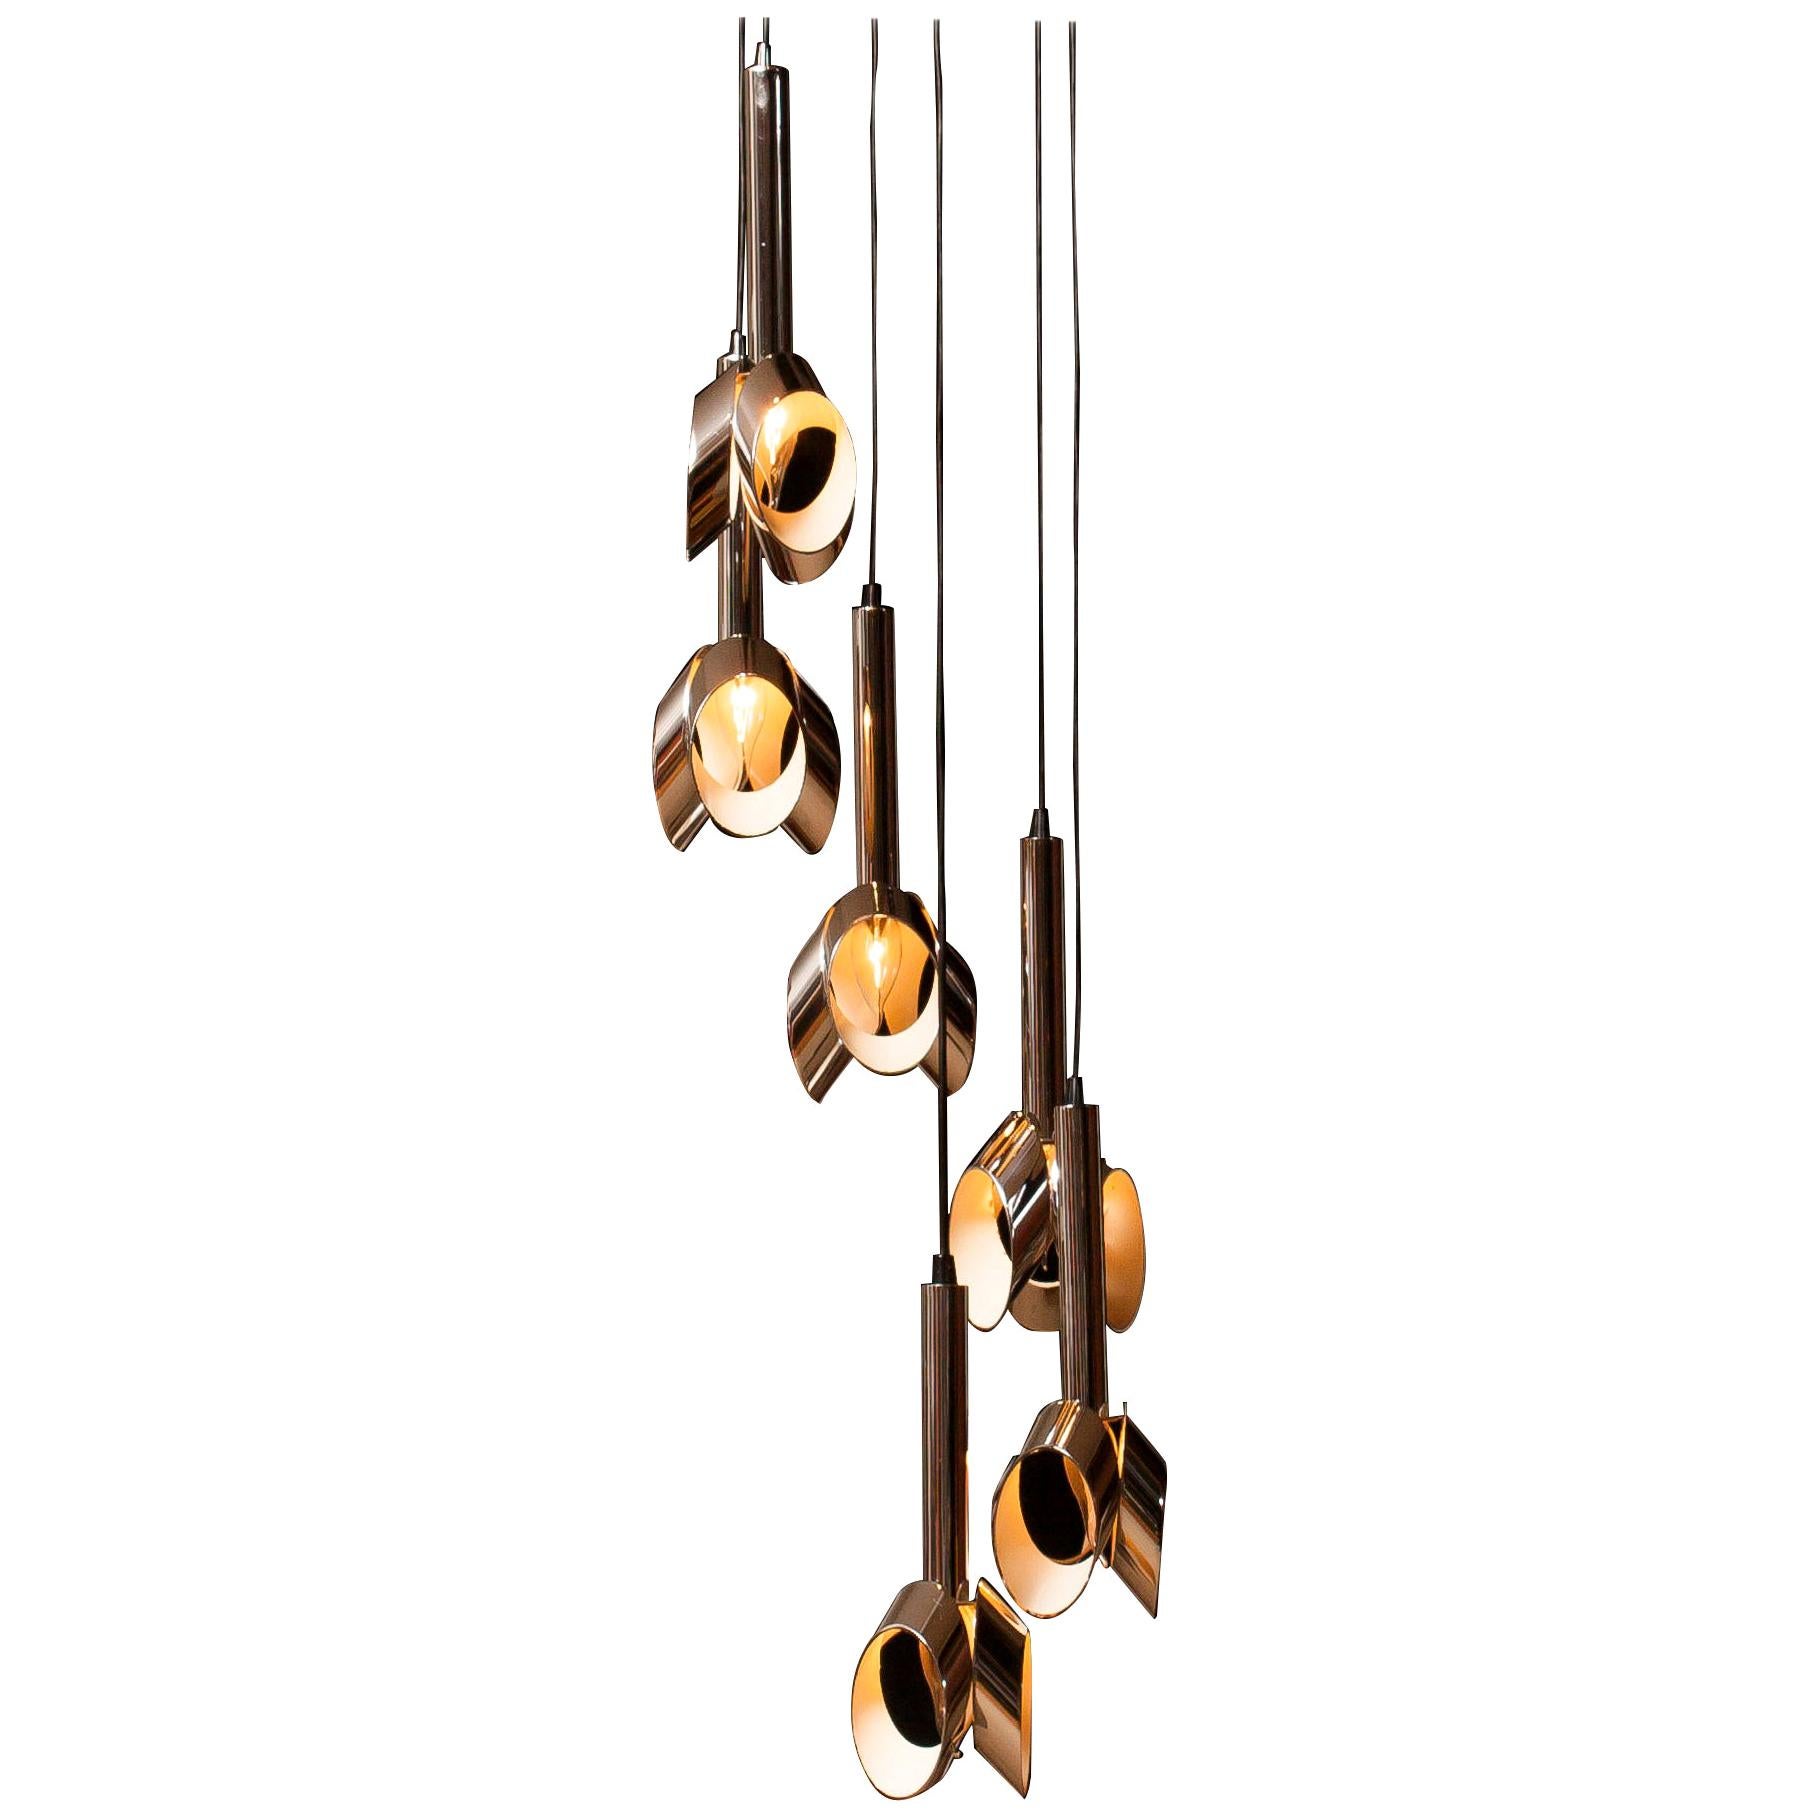 Beautiful ceiling lamp or chandelier by RAAK, Amsterdam.
This lamp consists of six chromed, with white lacquered details, pendants who are adjustable in height.
Period: 1960s.
Dimensions: H 135 cm, Ø 35 cm.

     